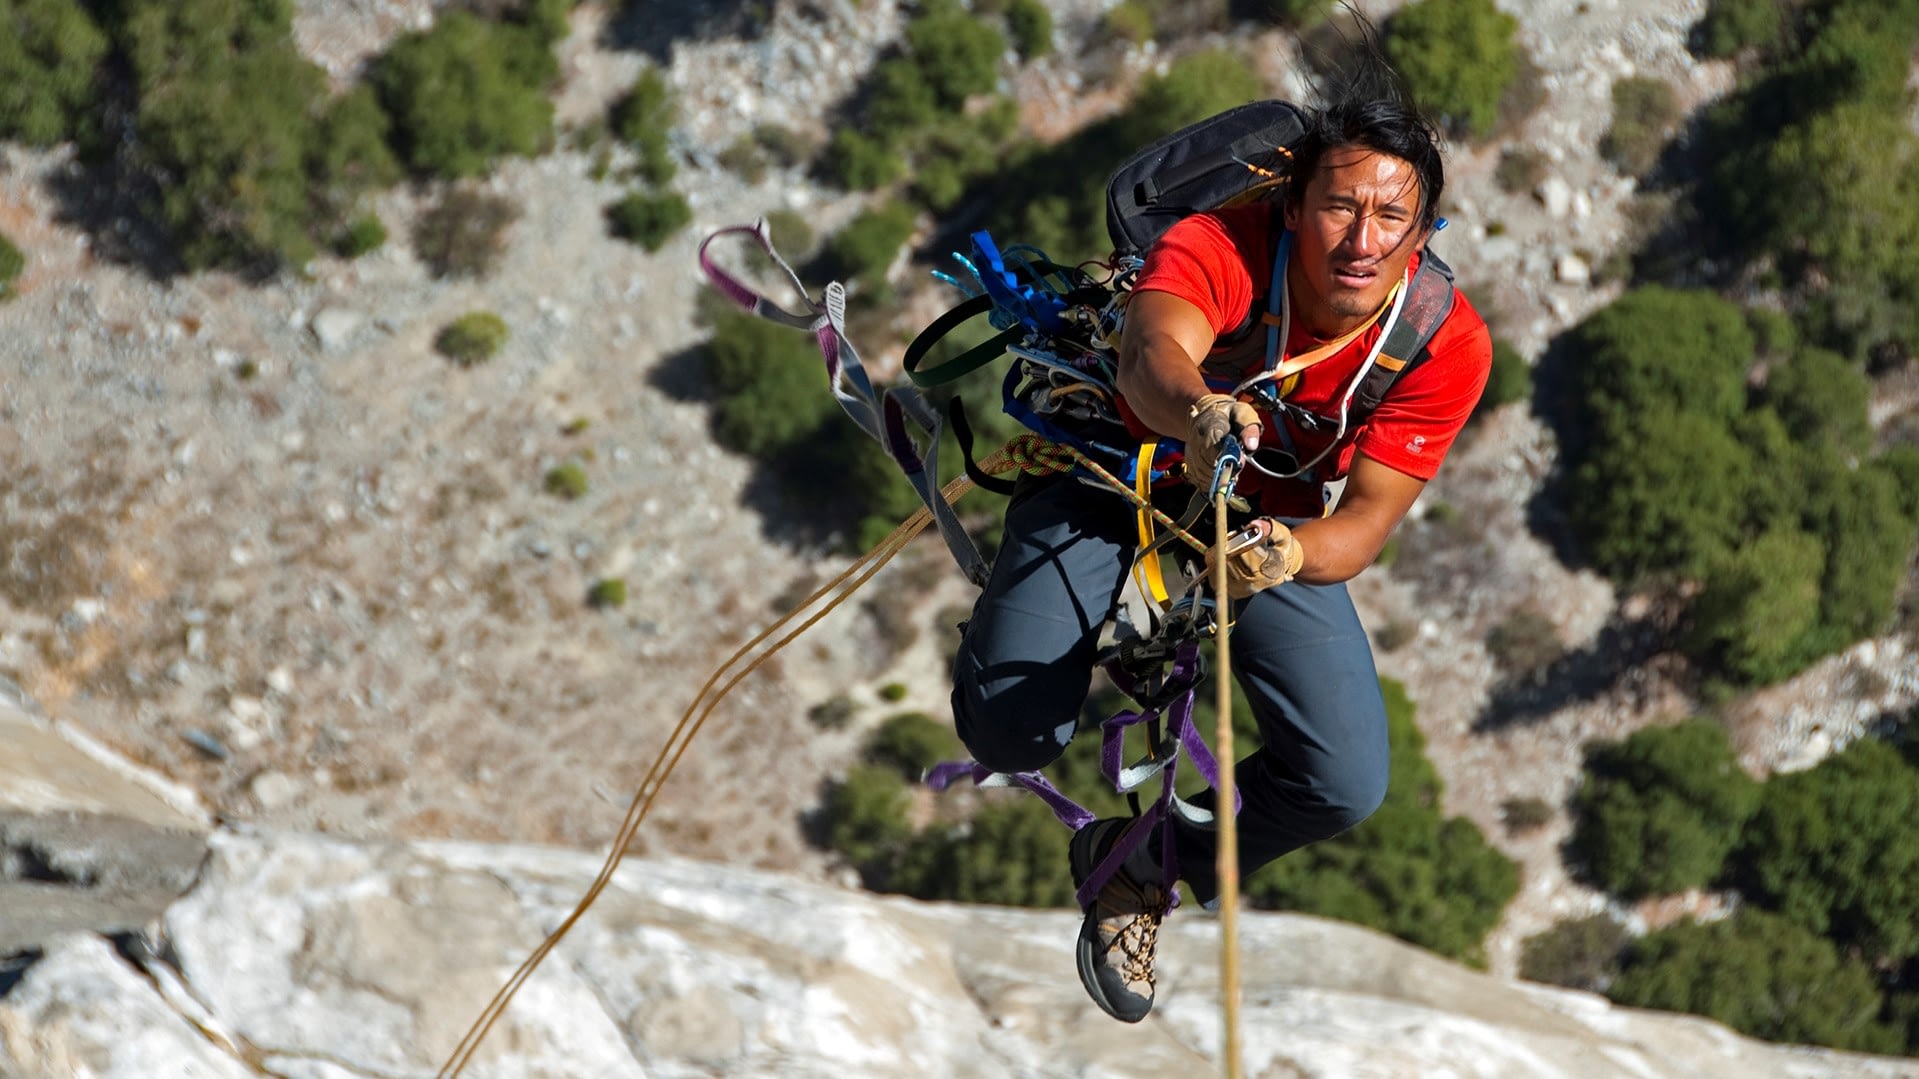 Image: Jimmy Chin hanging from a rope while climbing a mountain.